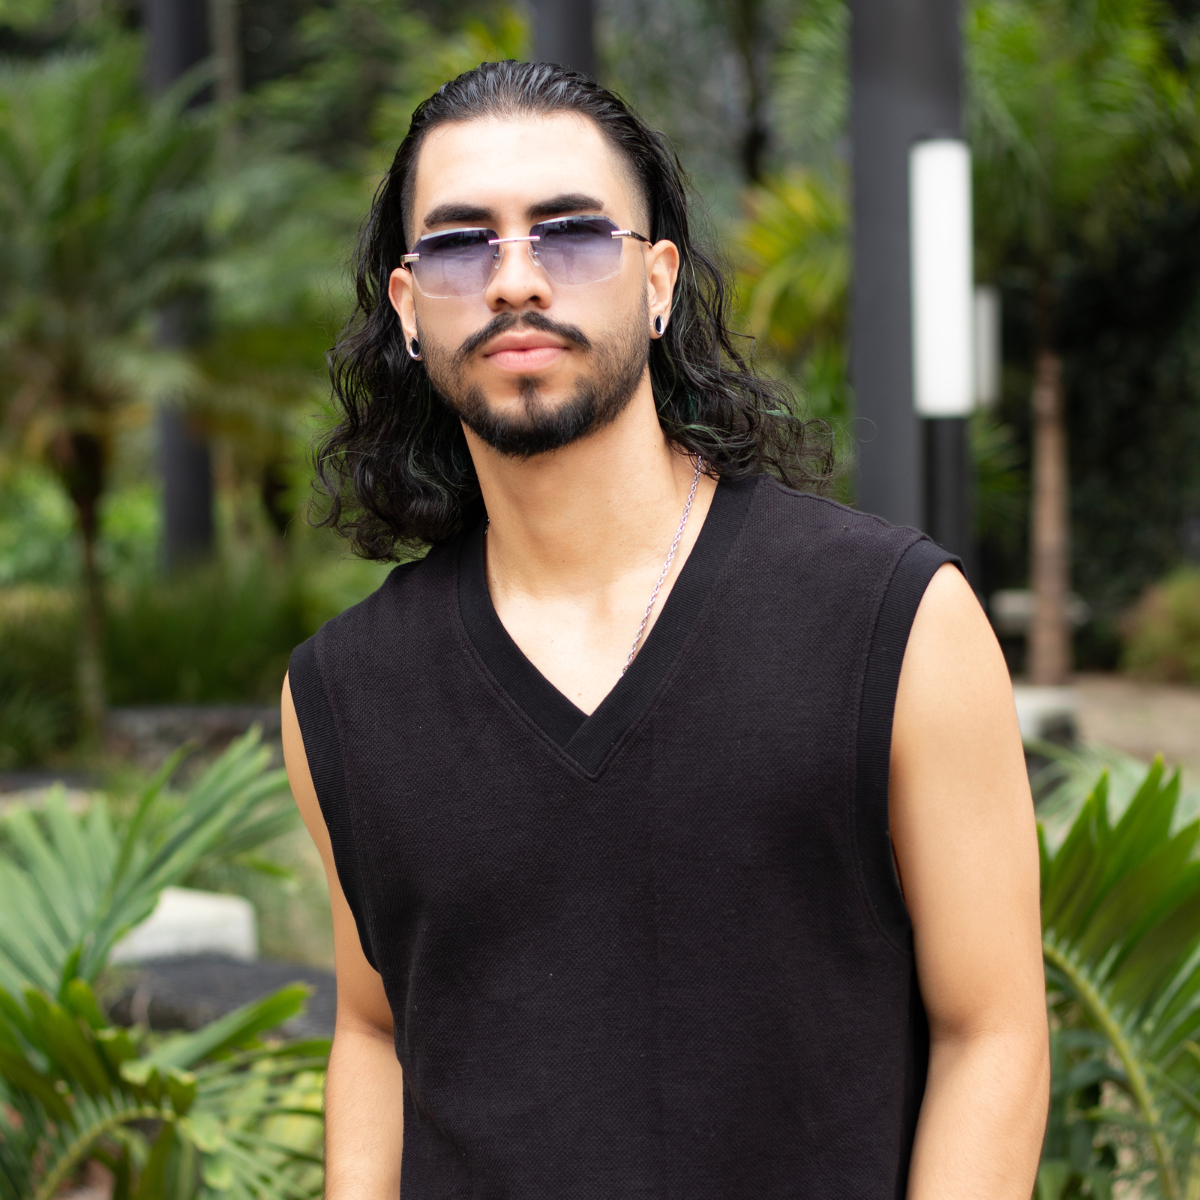 A model confidently wears 'Sancy' rimless sunglasses in gradient grey. The photo captures him in a casual black V-neck, with the rimless glasses complementing his relaxed yet stylish look. The lush greenery in the background provides a natural contrast that underscores the sunglasses' chic and versatile design.